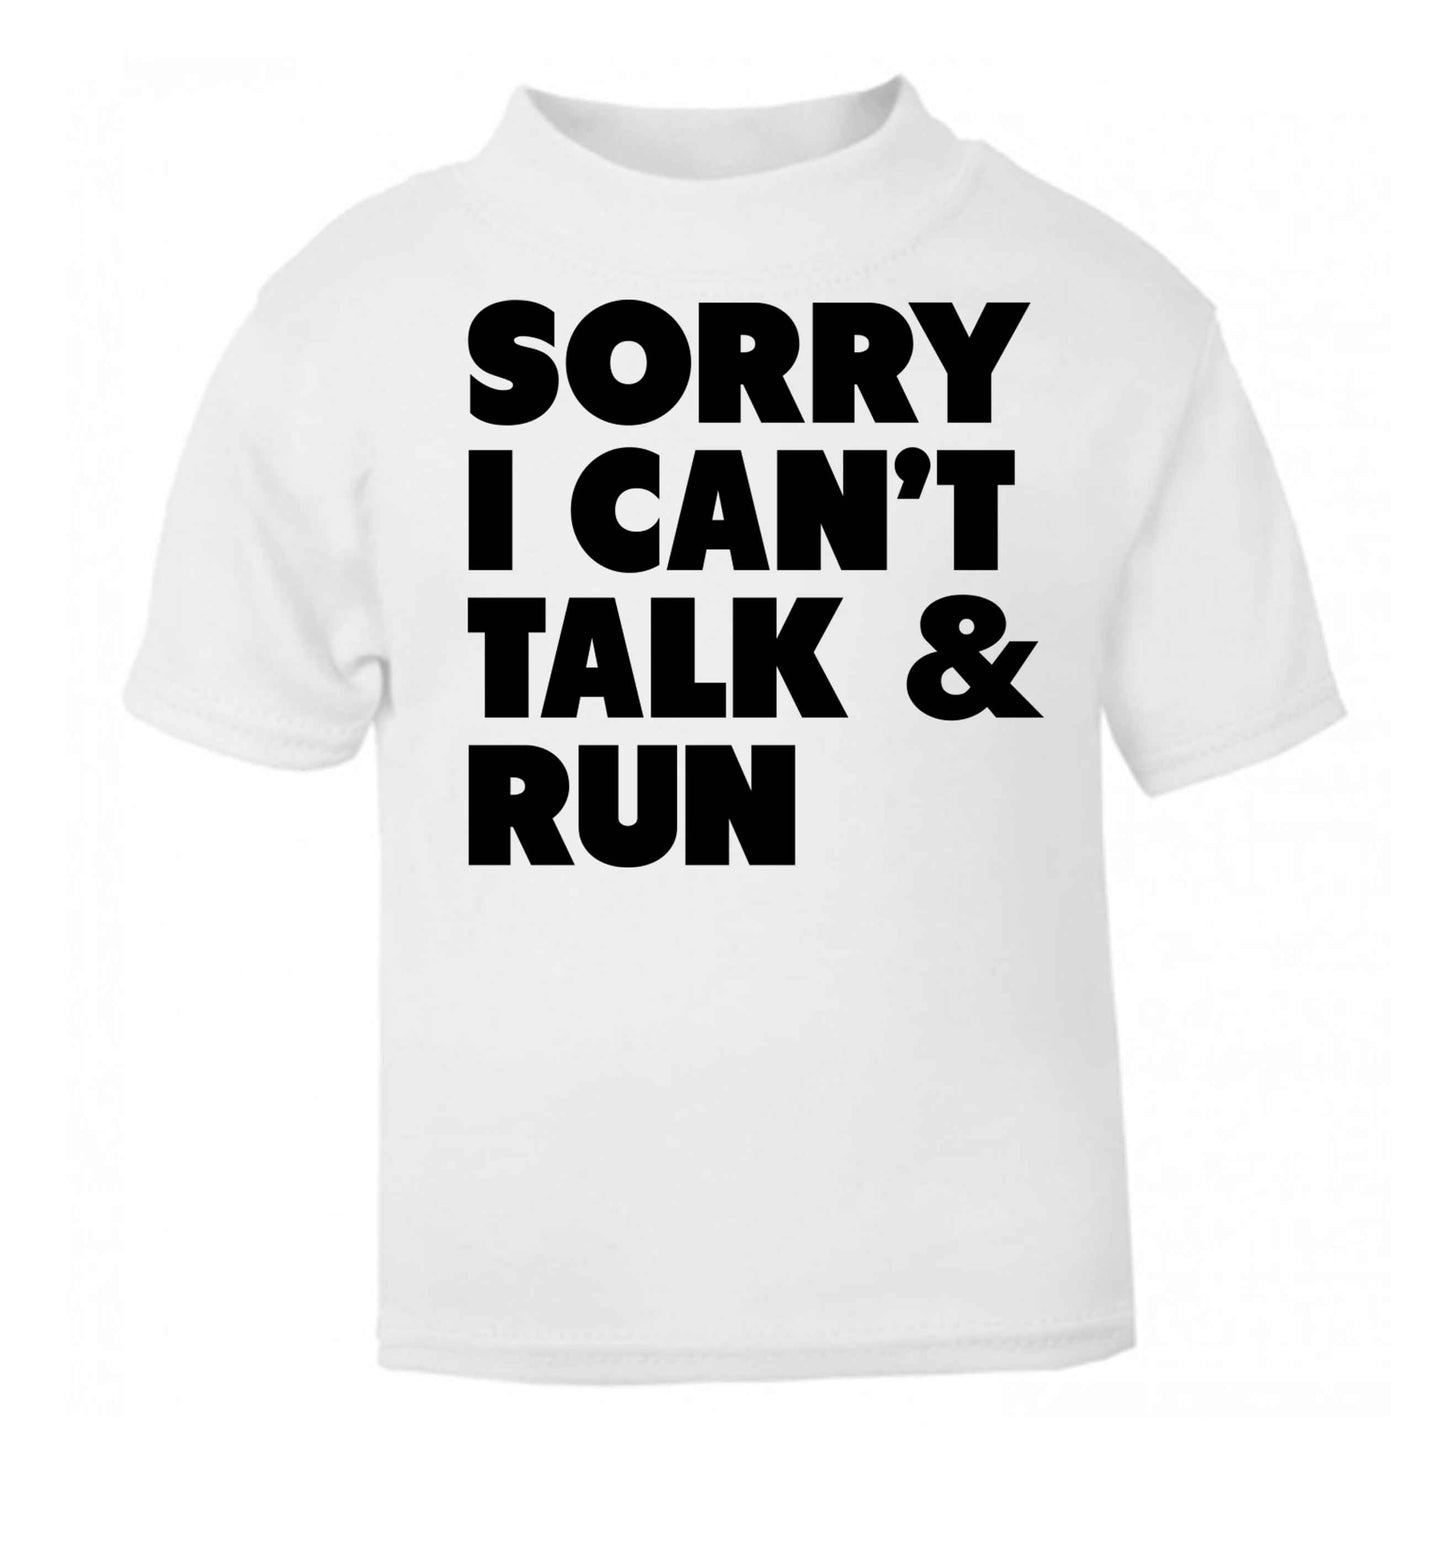 Sorry I can't talk and run white baby toddler Tshirt 2 Years